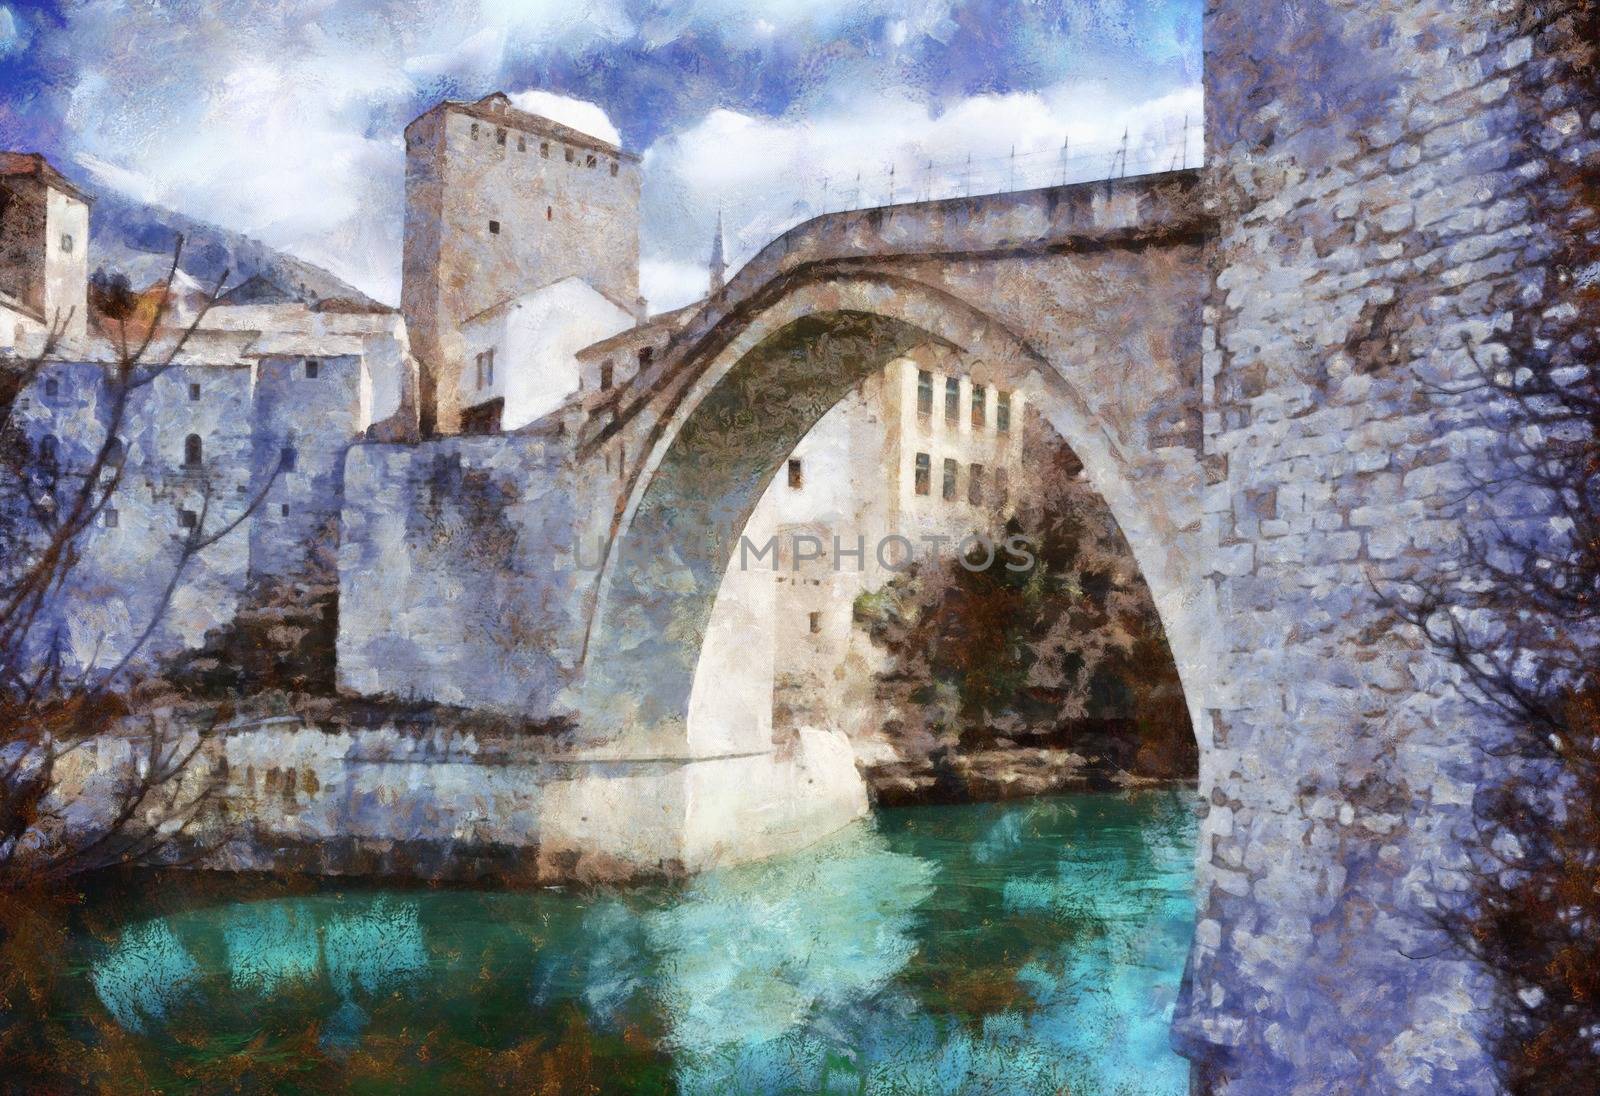 Digital Painting, oil on canvas, of Stari Most (Old Bridge), almost 500 years old monument in the city of Mostar in Bosnia and Herzegovina, and it's protected by Unesco. It crosses Neretva river.